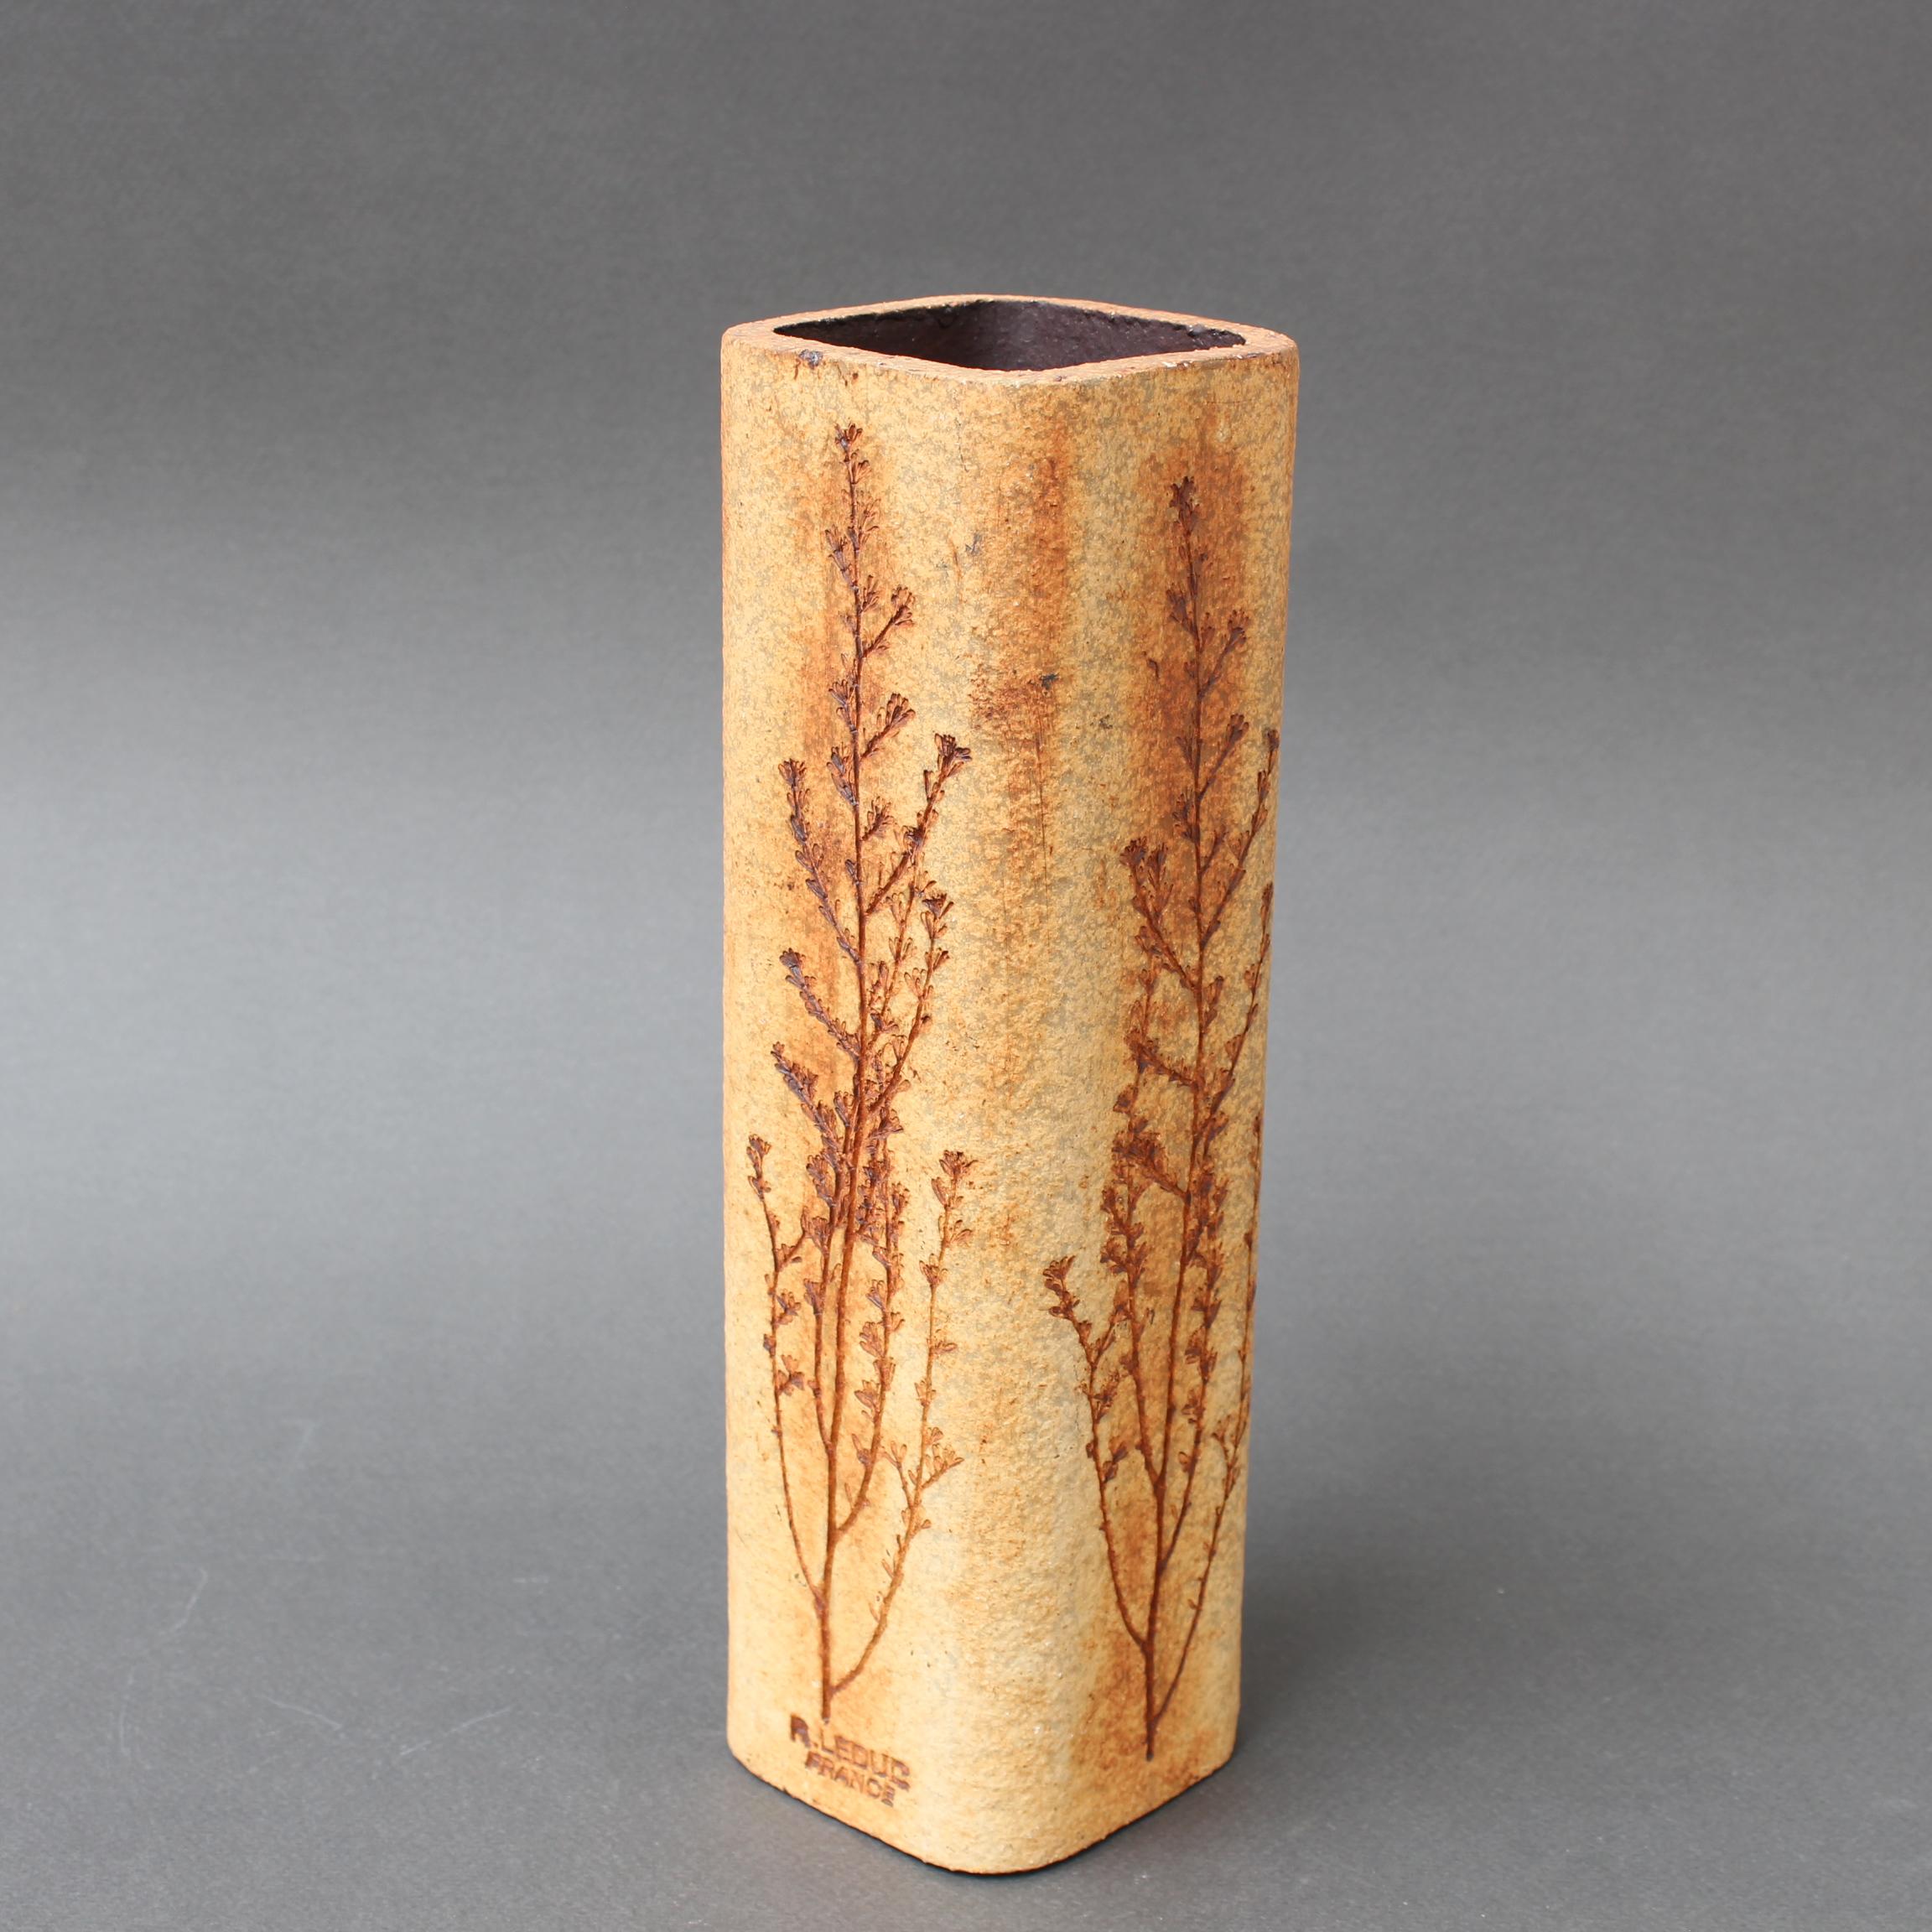 Vintage ceramic vase by Raymonde Leduc (circa 1960s). Sandstone coloured with plant motifs inlaid on all four sides. In fair overall condition showing a chip in a lower rounded corner along with some age-related marks and spotting. It has been